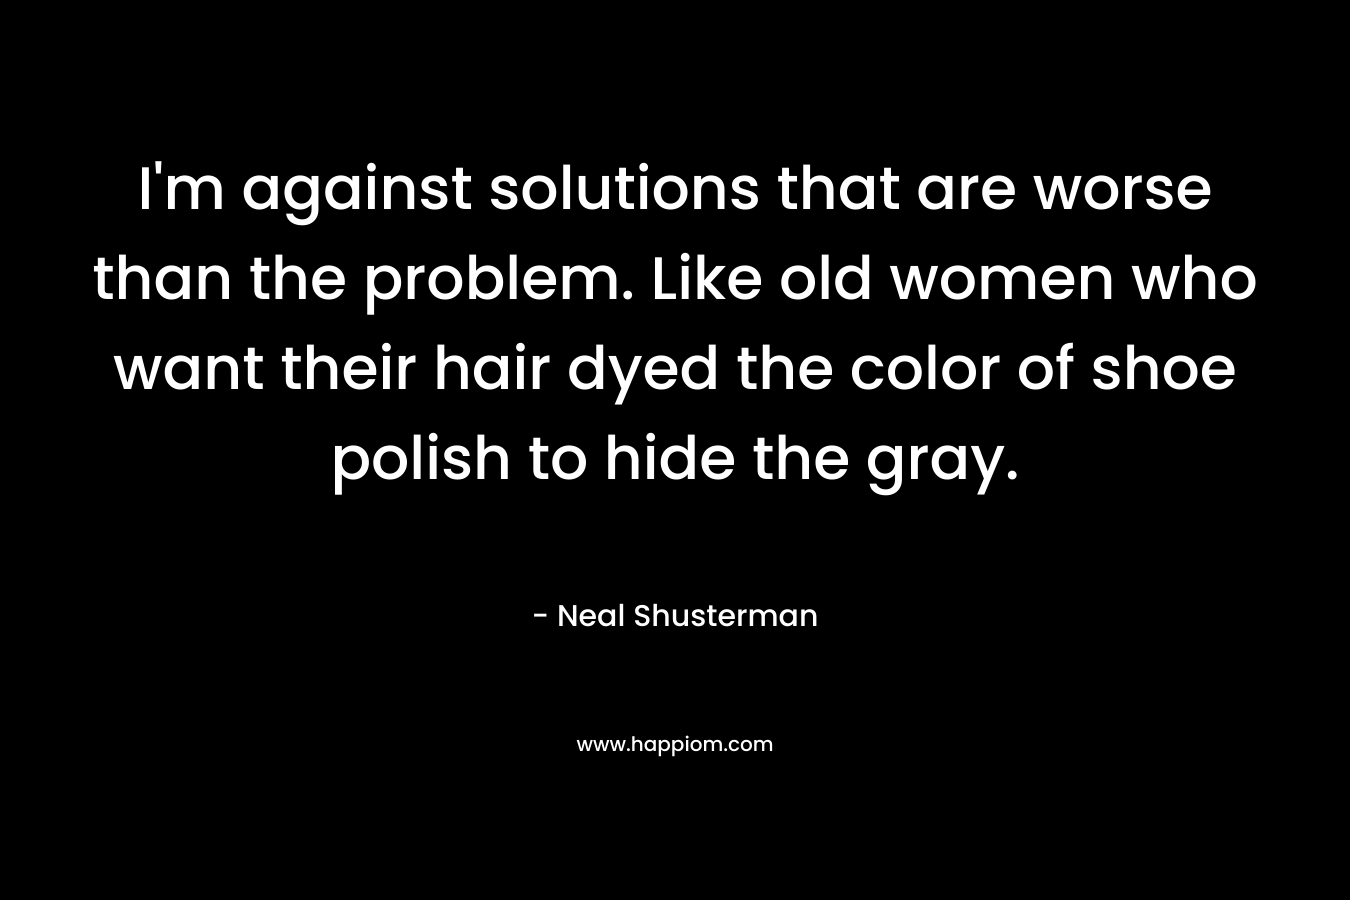 I’m against solutions that are worse than the problem. Like old women who want their hair dyed the color of shoe polish to hide the gray. – Neal Shusterman